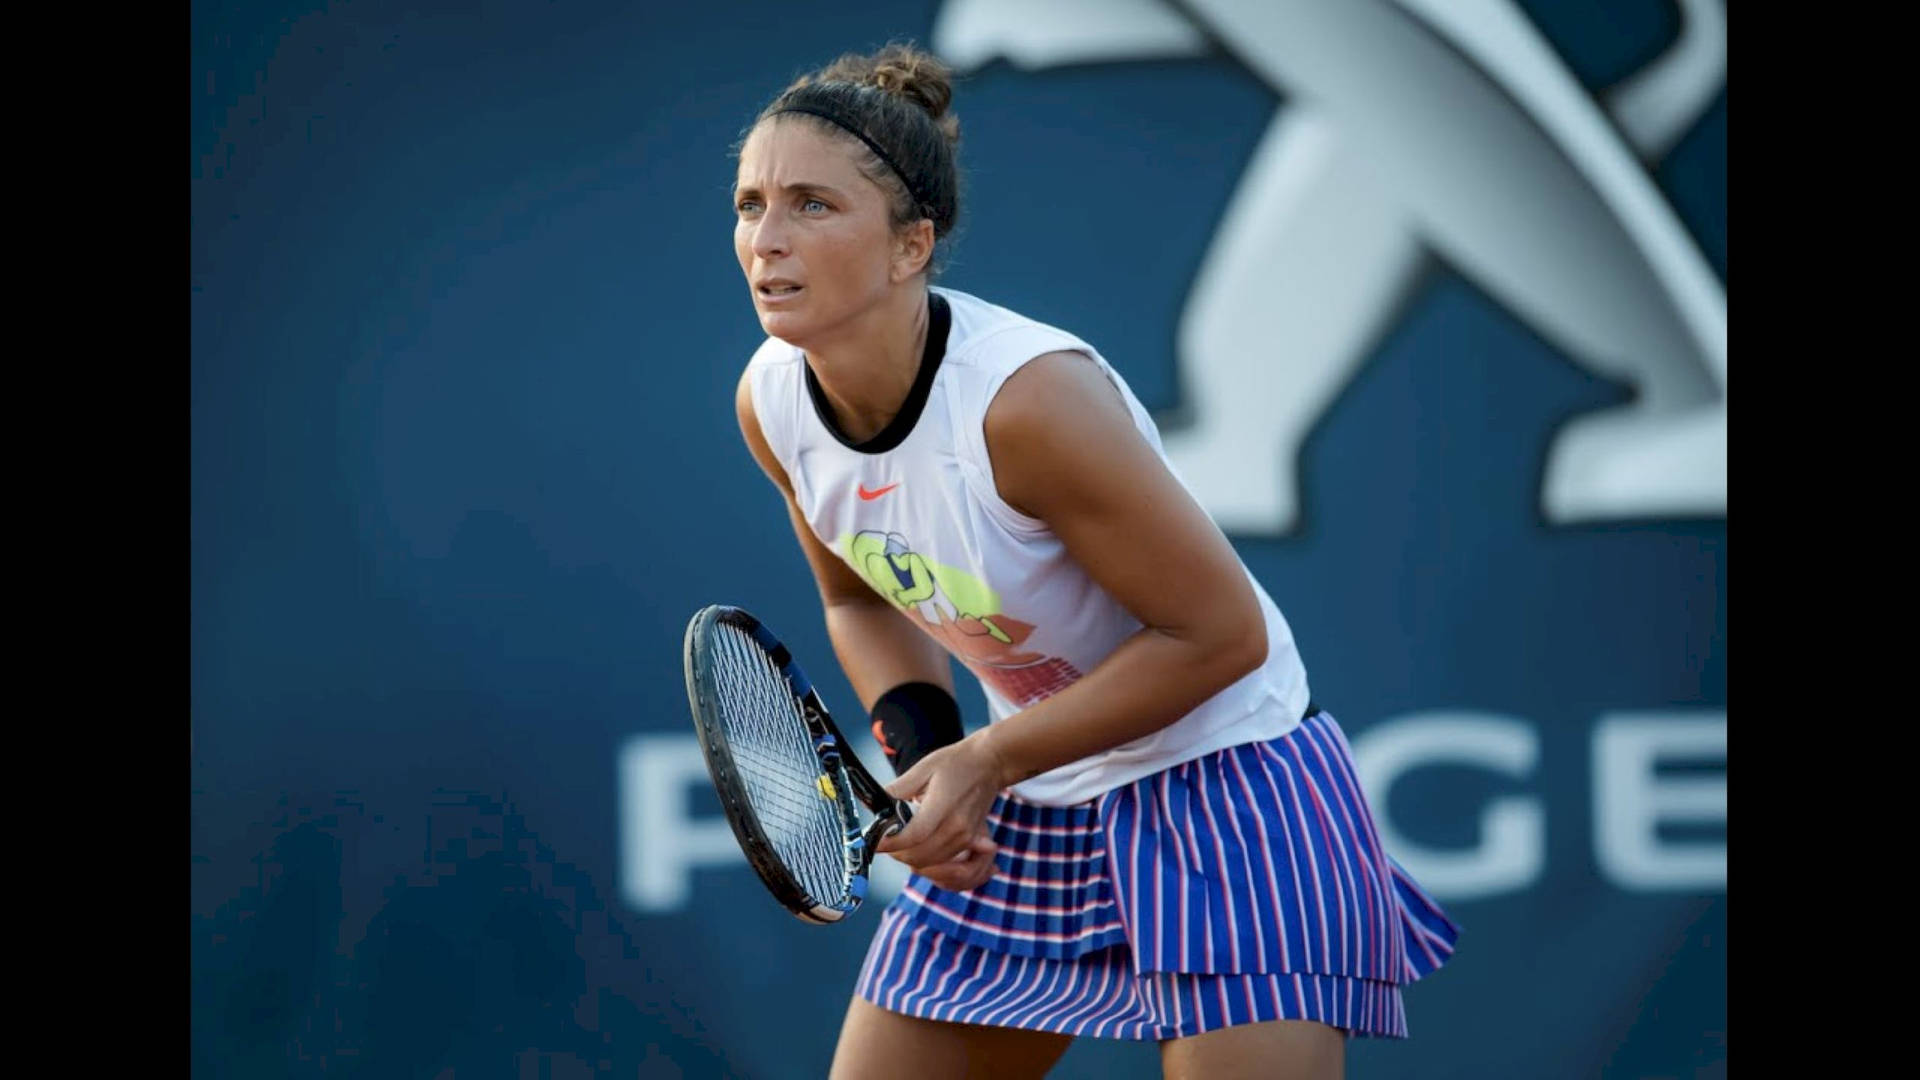 Sara Errani in Deep Concentration on the Tennis Court Wallpaper